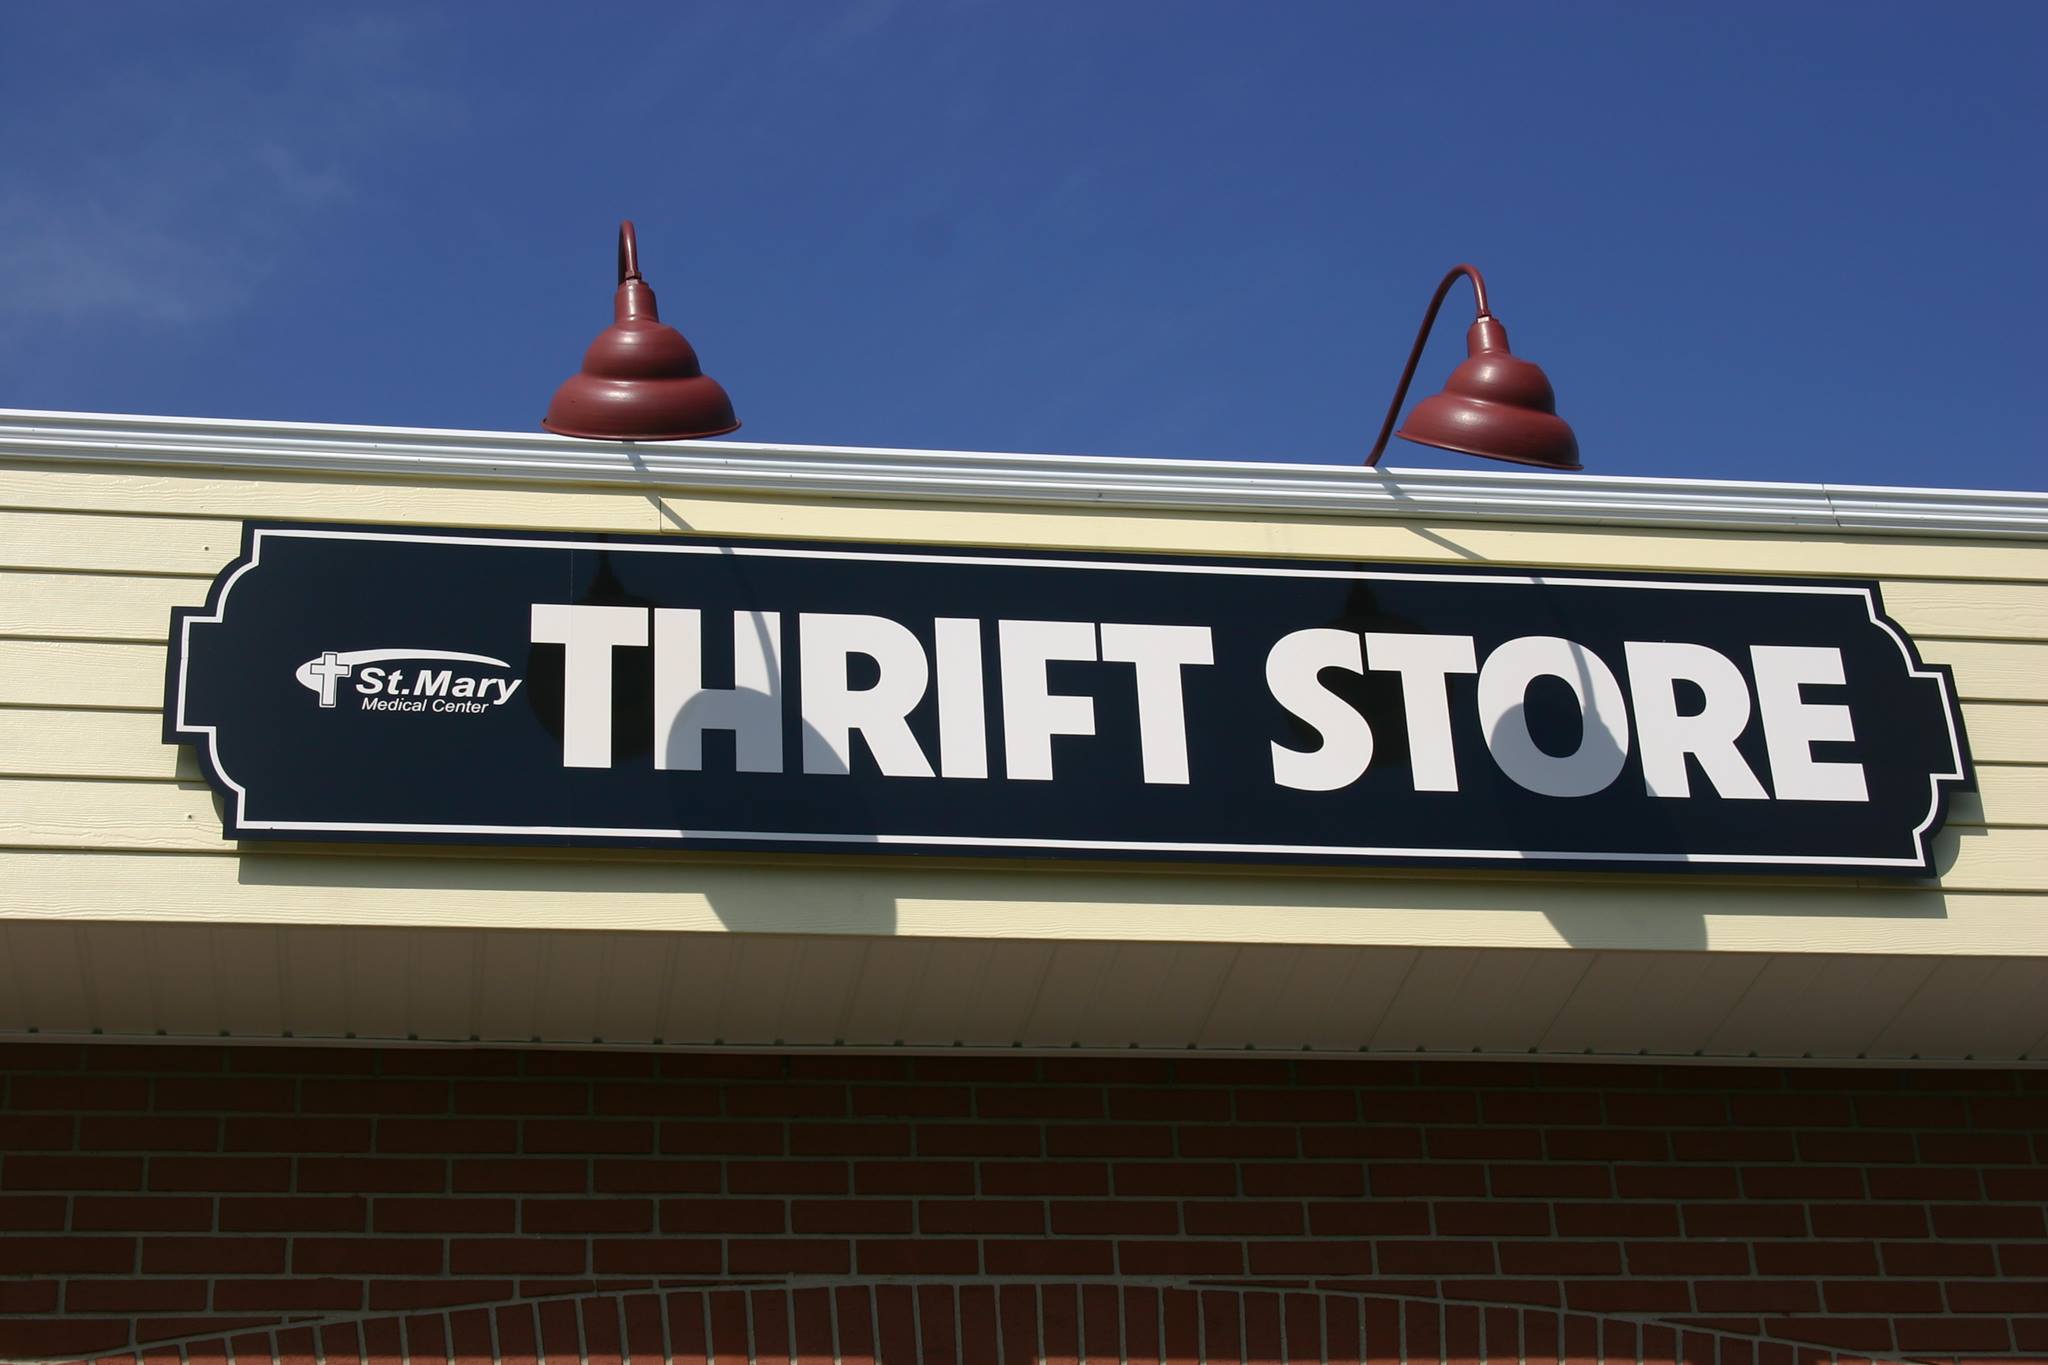 thrift store sign | communityleague-stmary.org